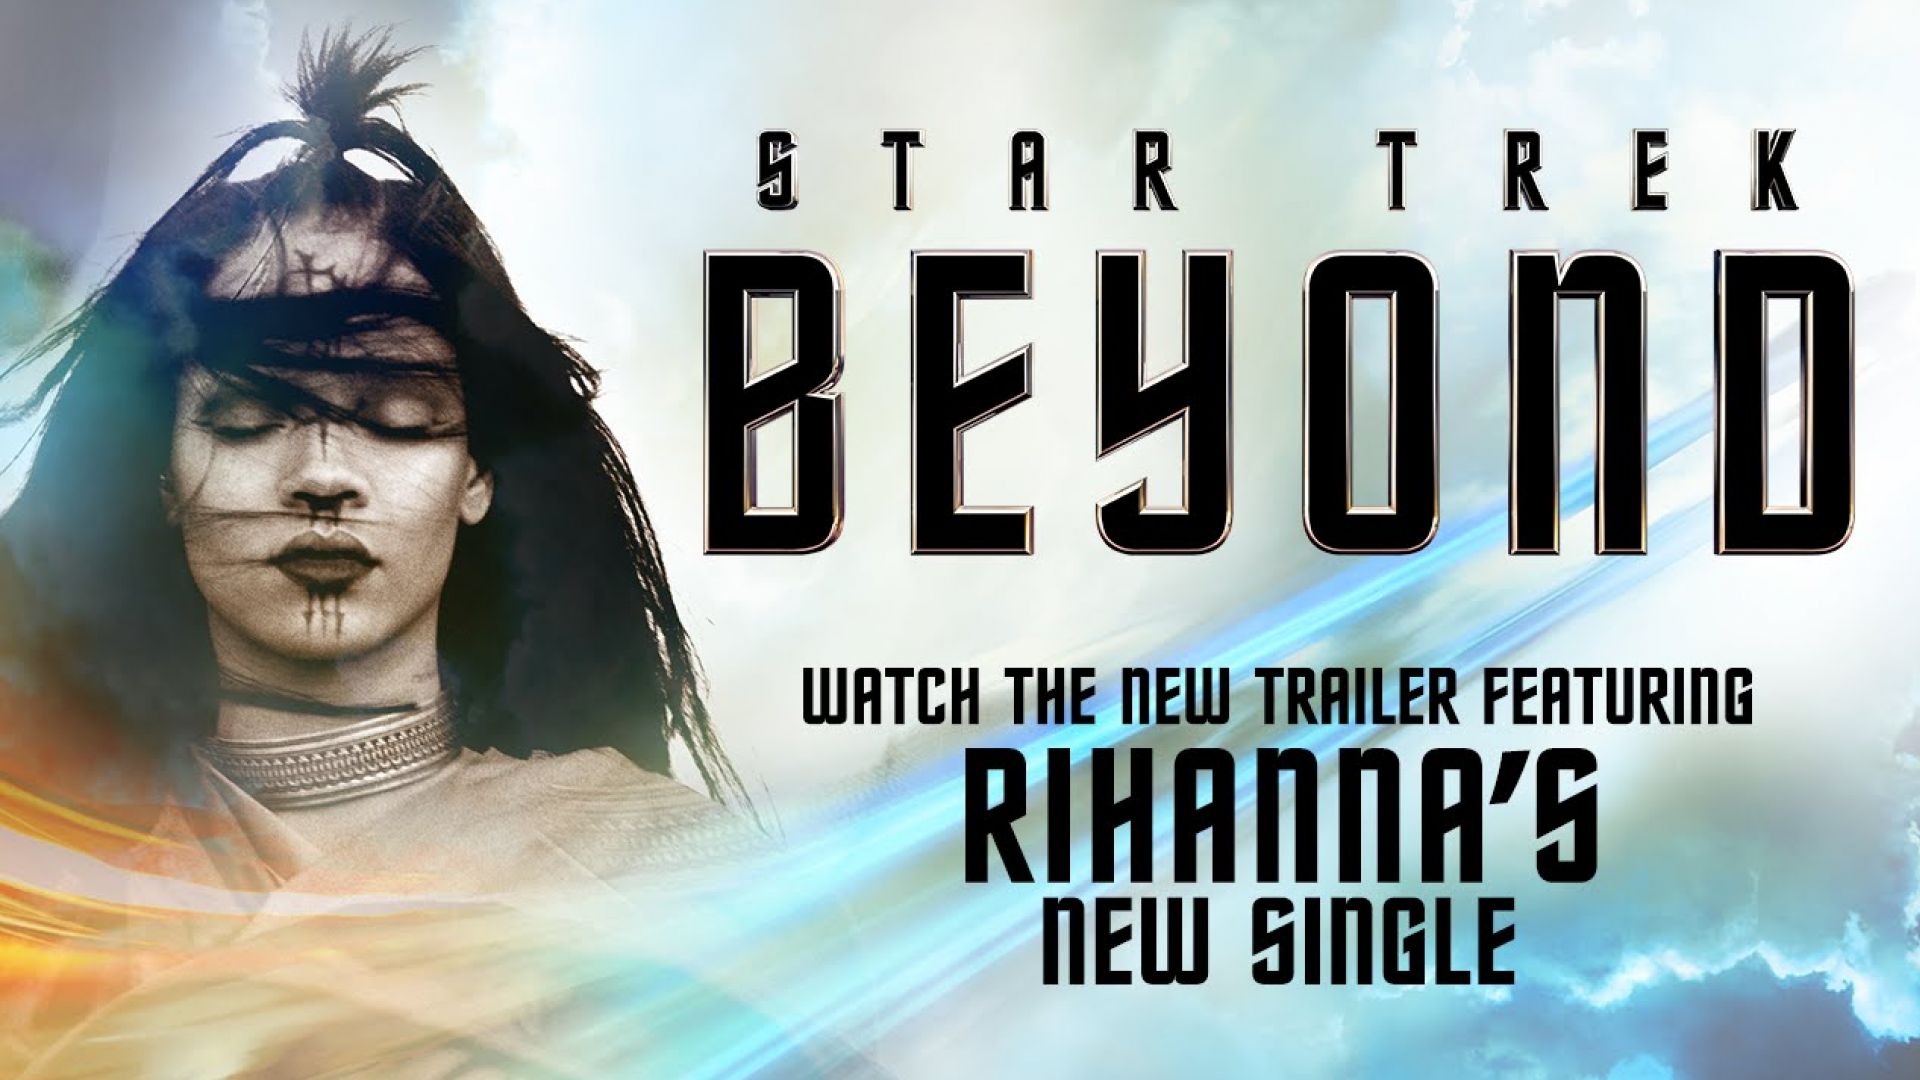 New Star Trek Beyond Trailer Featuring &quot;Sledgehammer&quot; By Rih